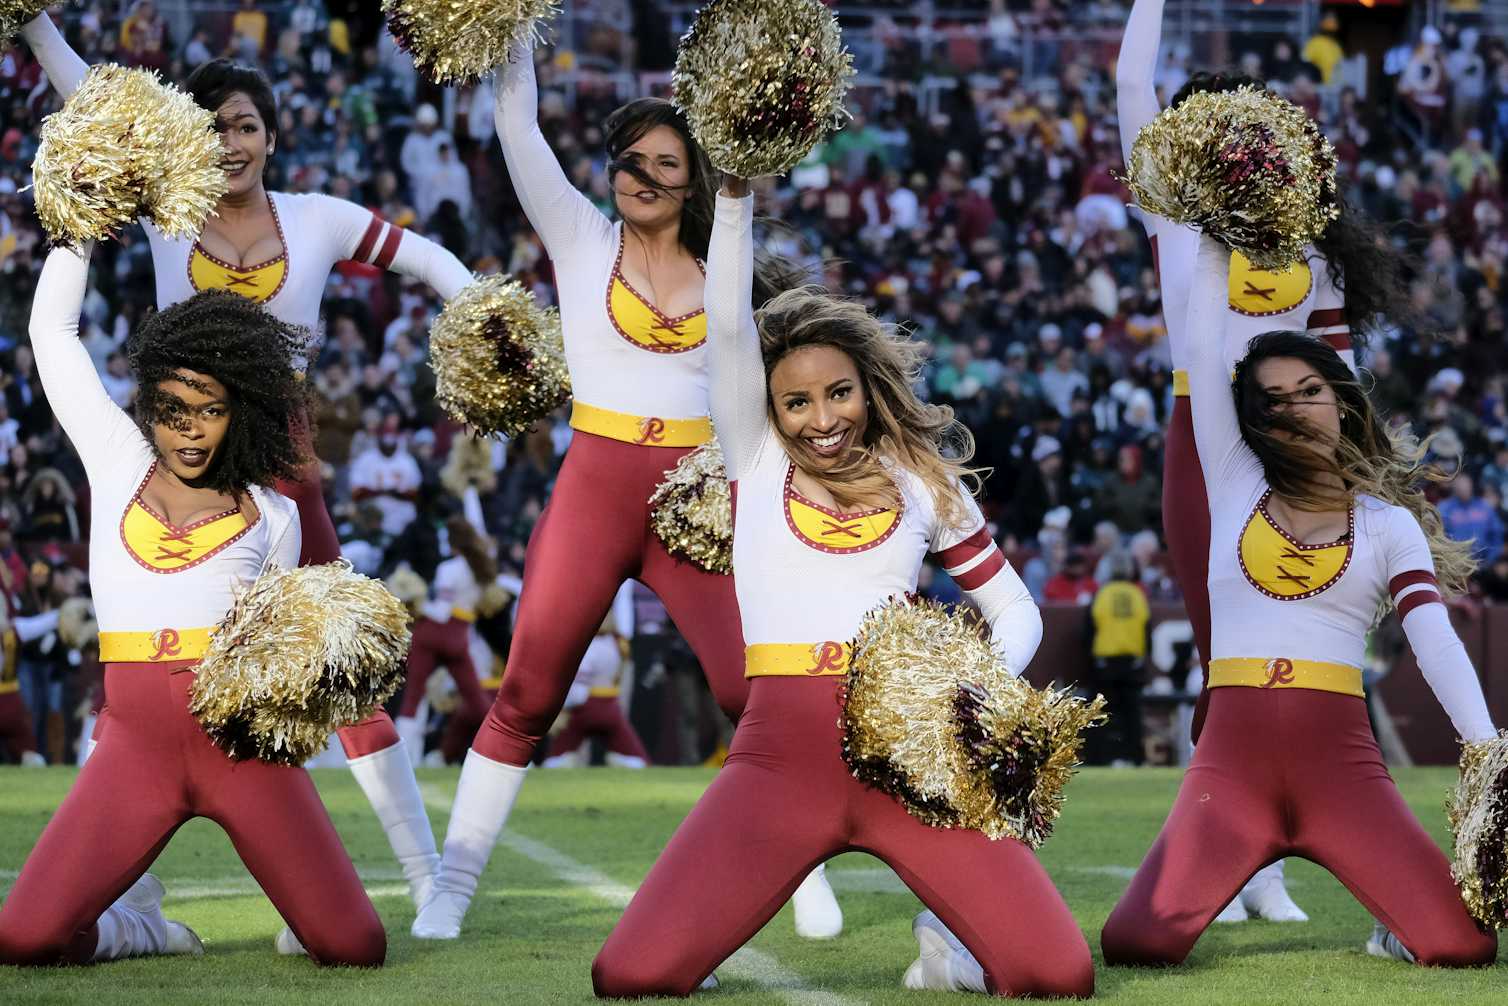 The Washington Football Team was hit by lawsuits from their cheerleaders fo...